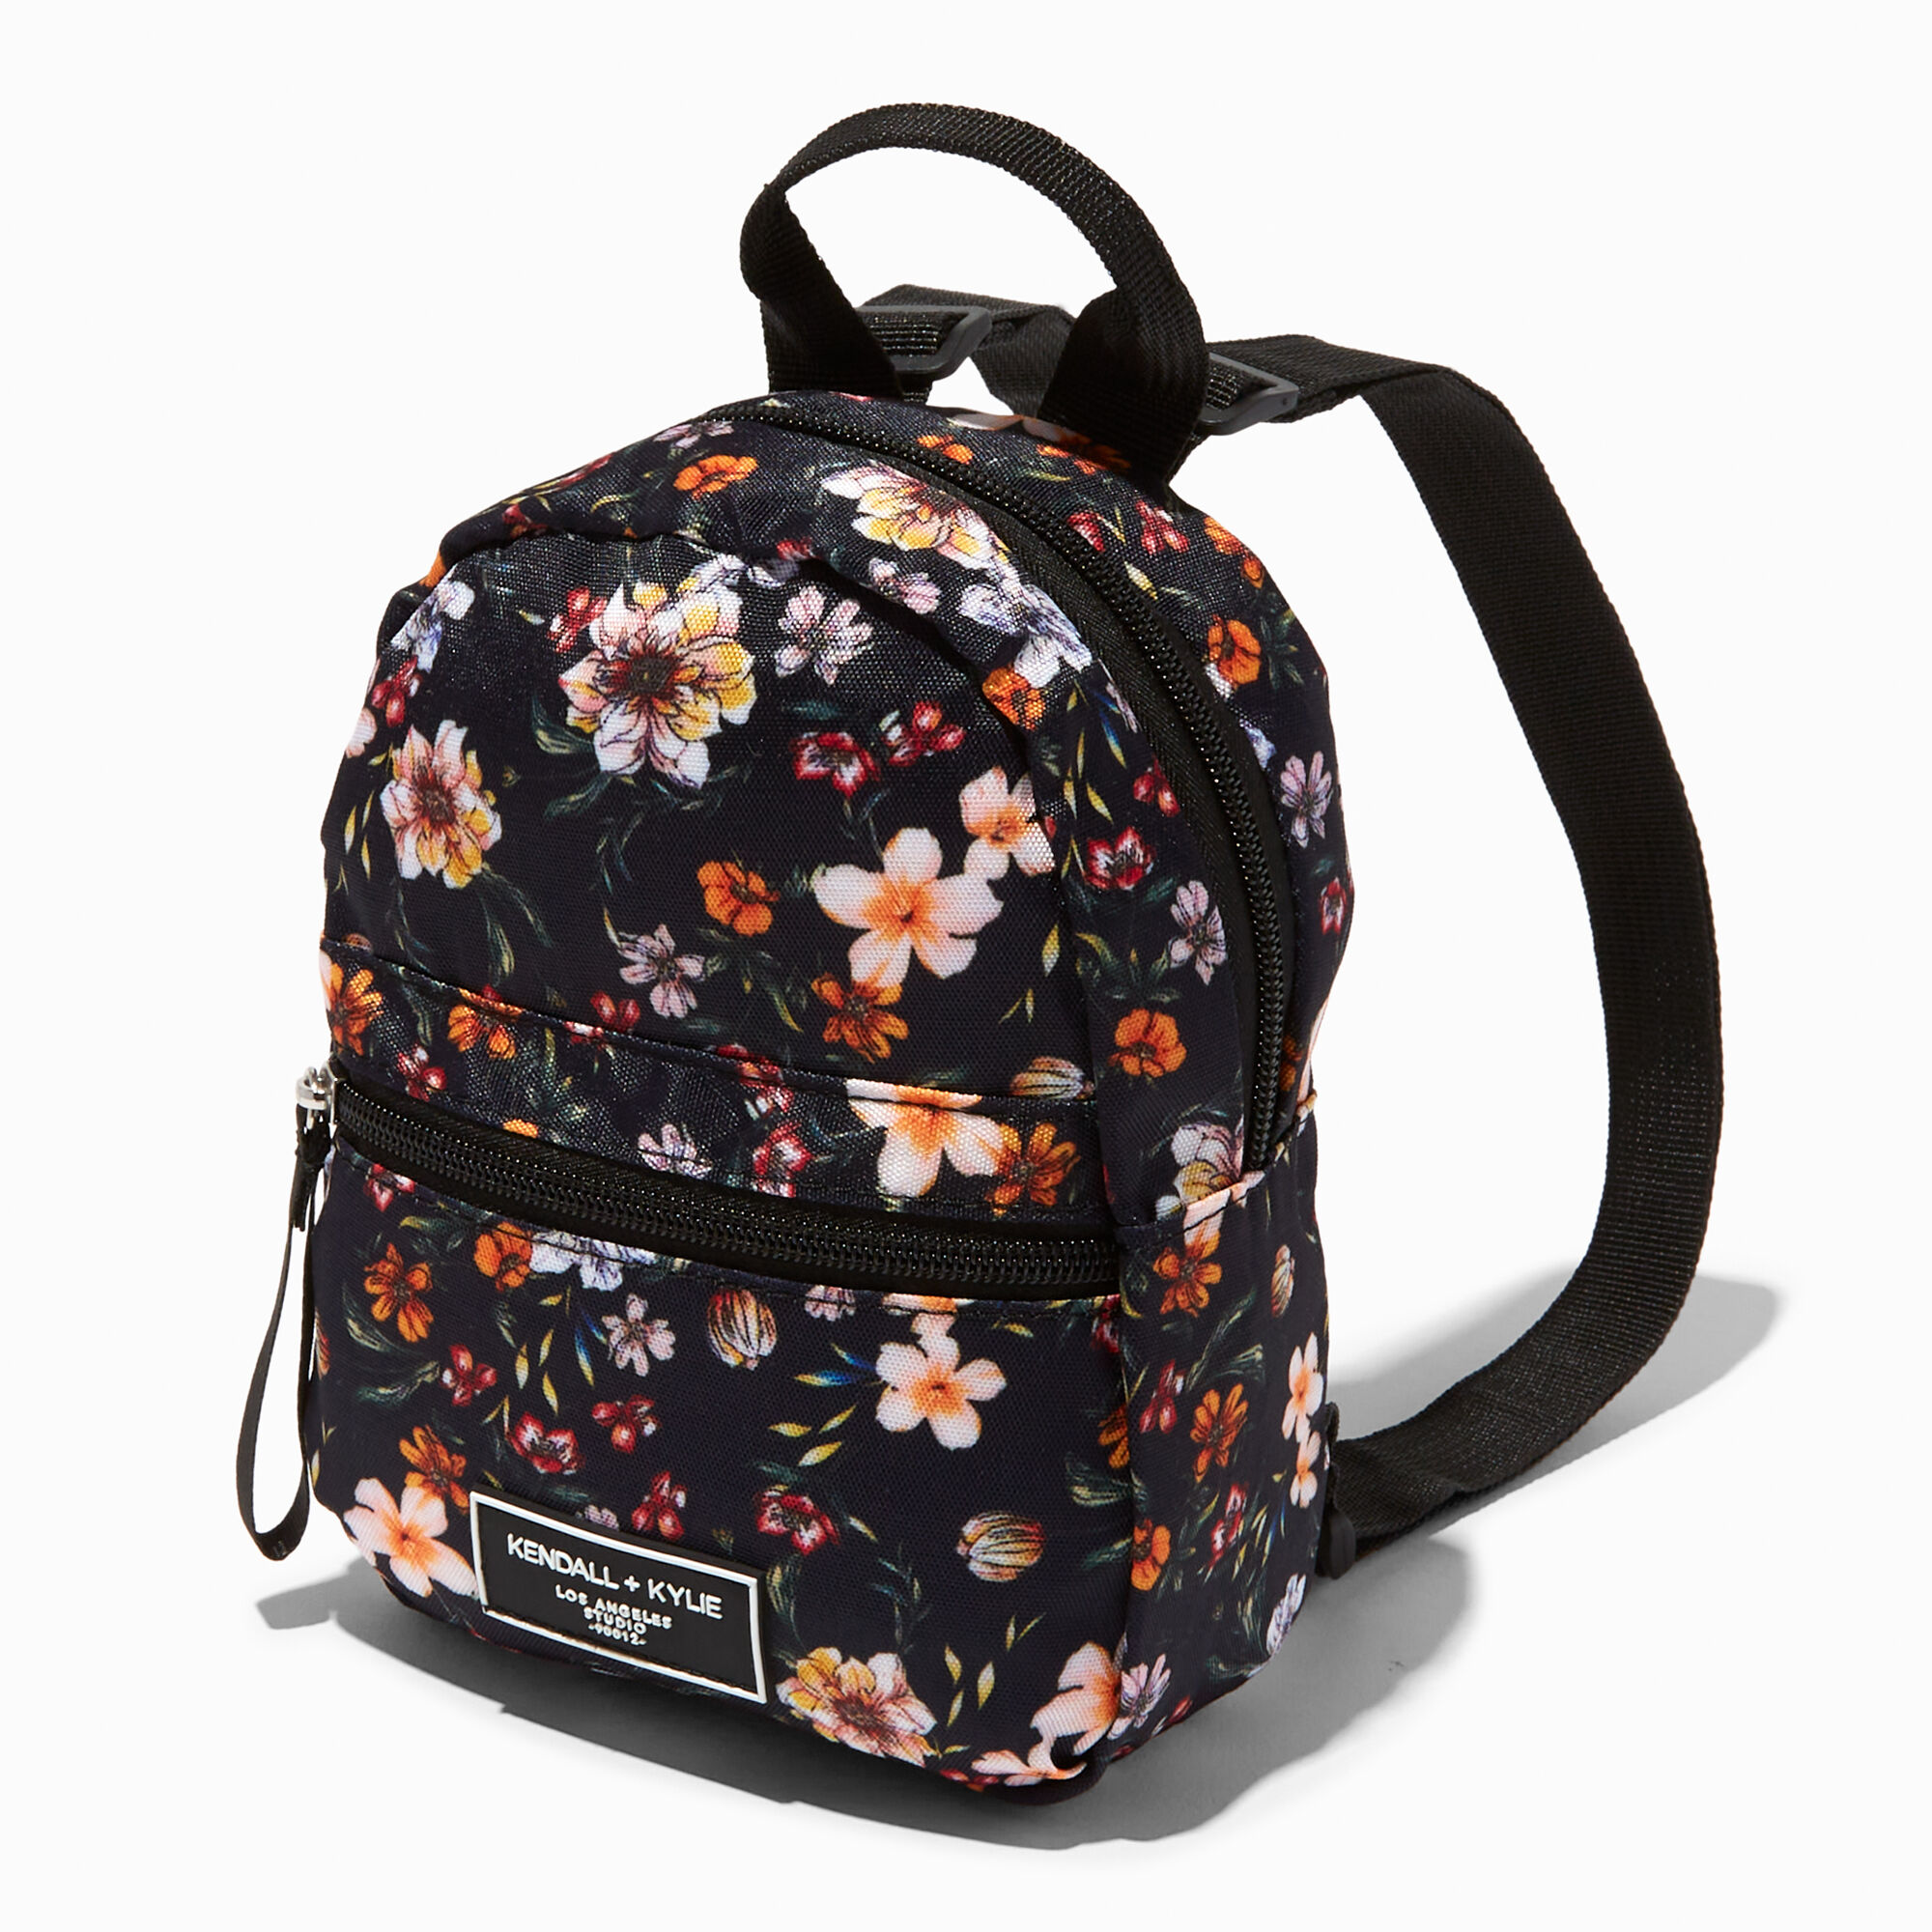 KENDALL + KYLIE Micro Floral Mini Backpack